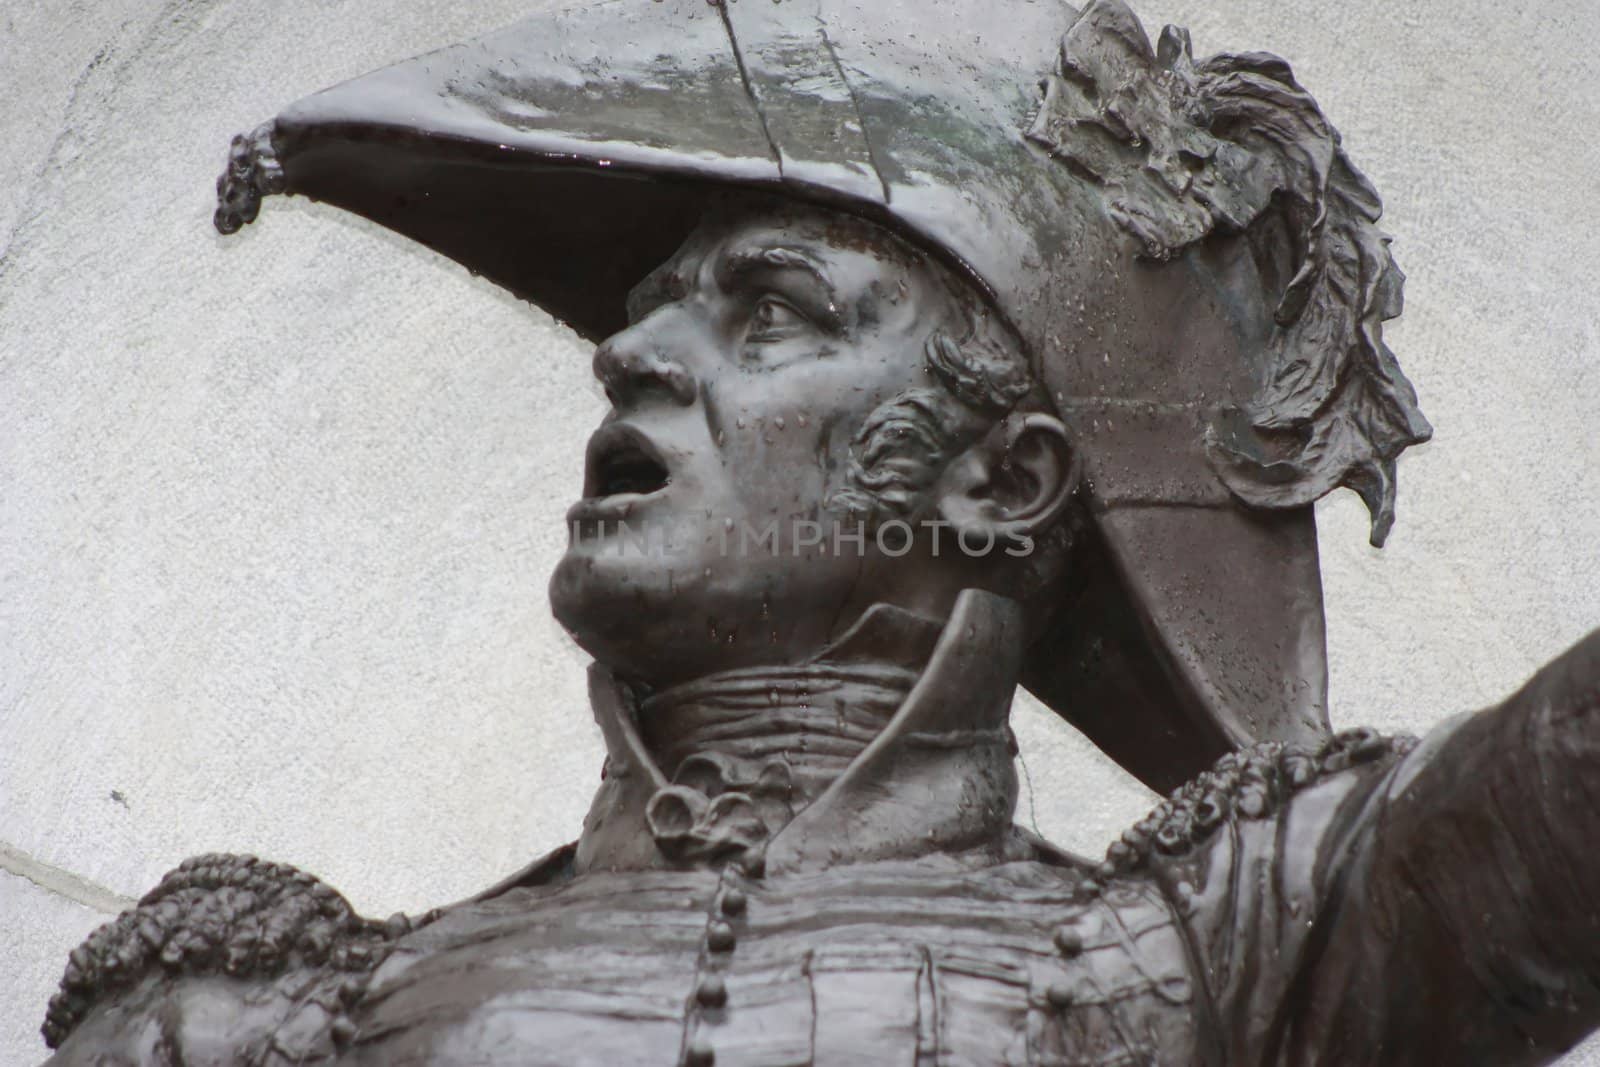 a statue depicting a commander, a man of power